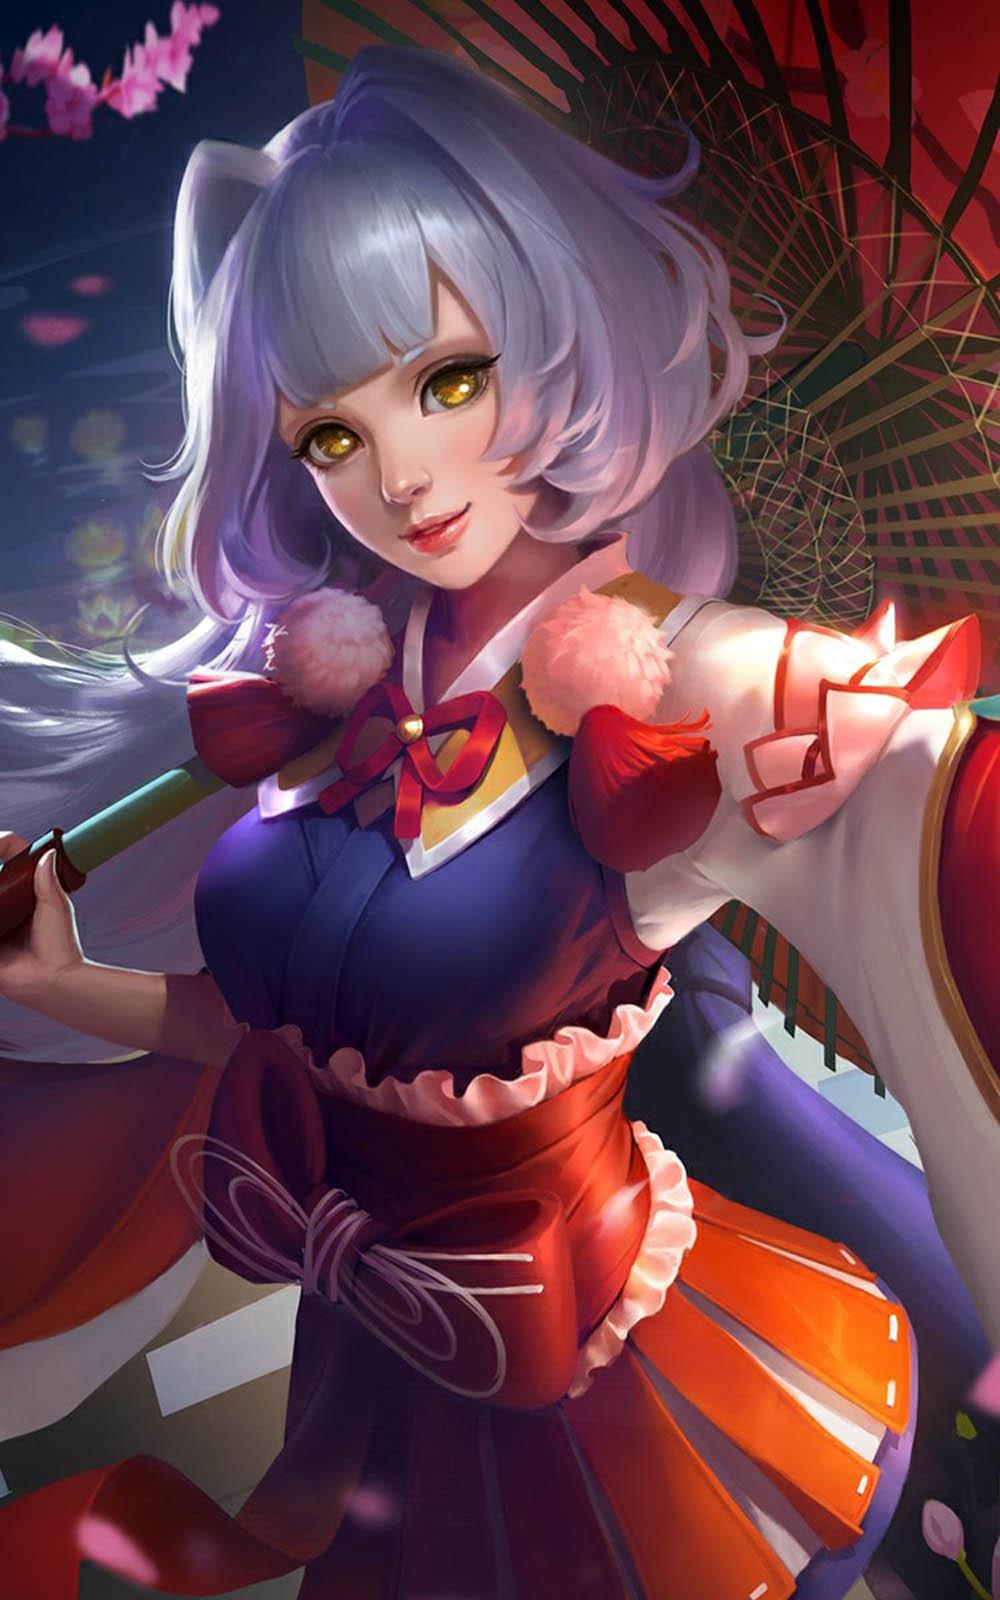 Download Cherry Witch Kagura Mobile Legends Free Pure 4K Ultra HD